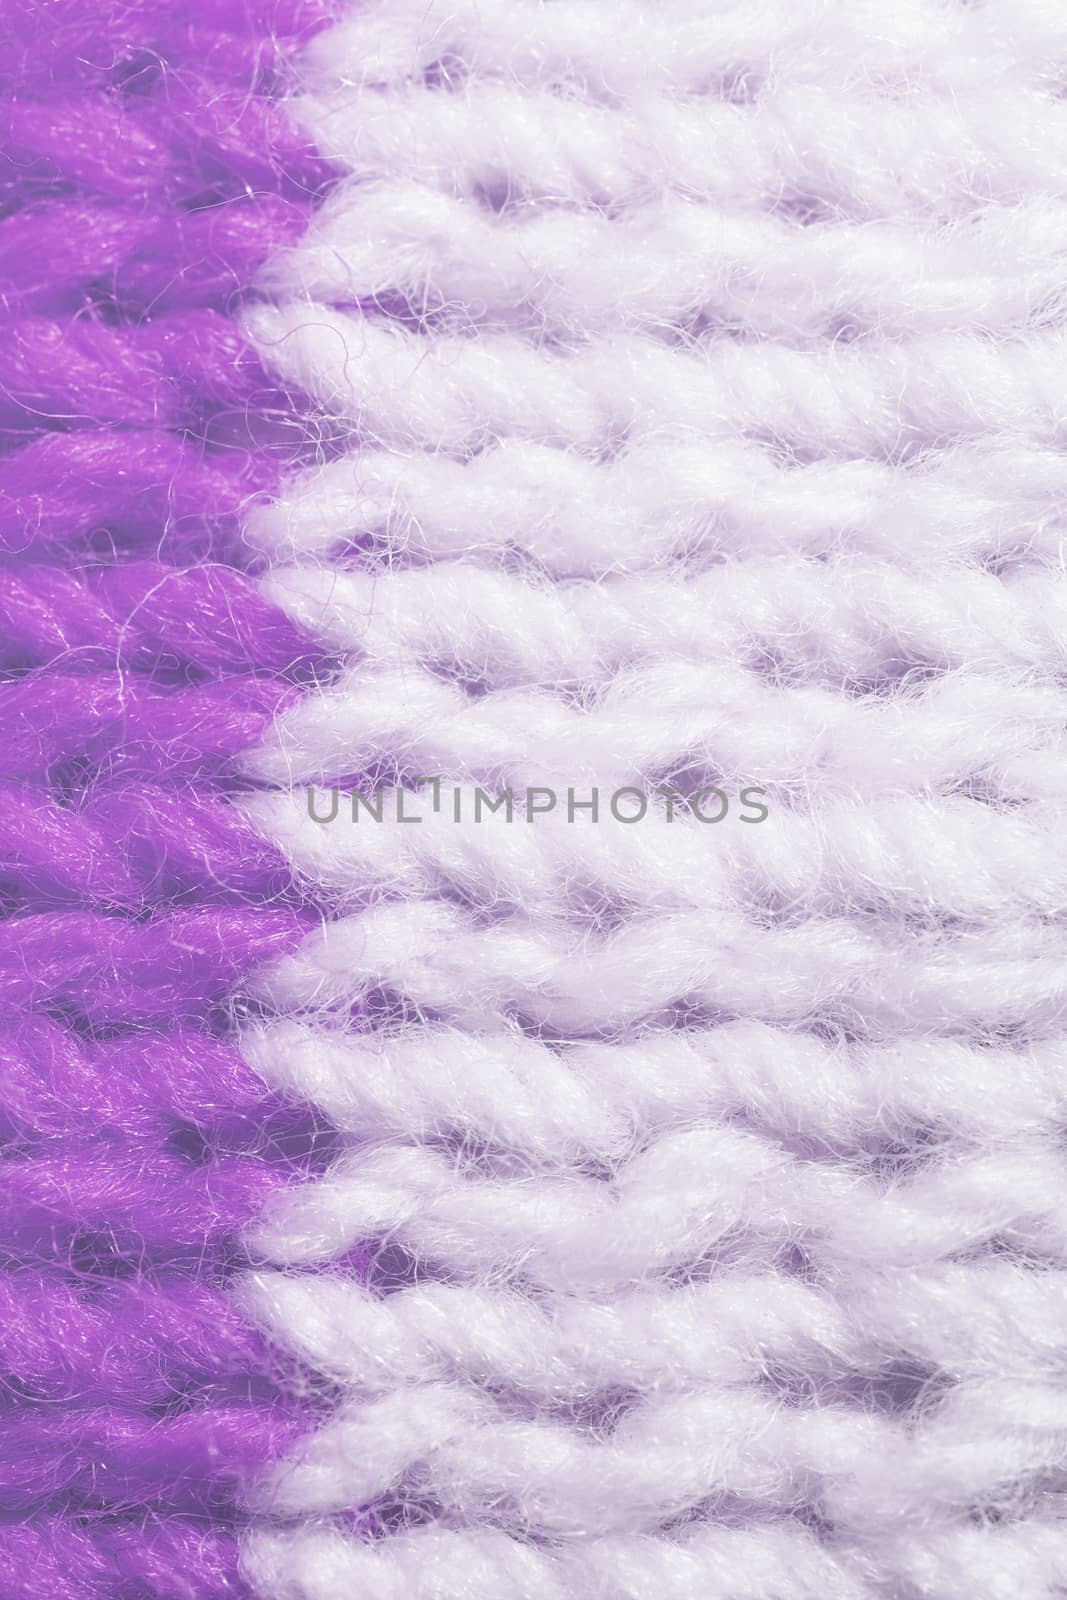 Violet White Wool Knitting Texture. Horizontal Along Weaving Crochet Detailed Rows. Sweater Textile Background. Macro Closeup. by sanches812